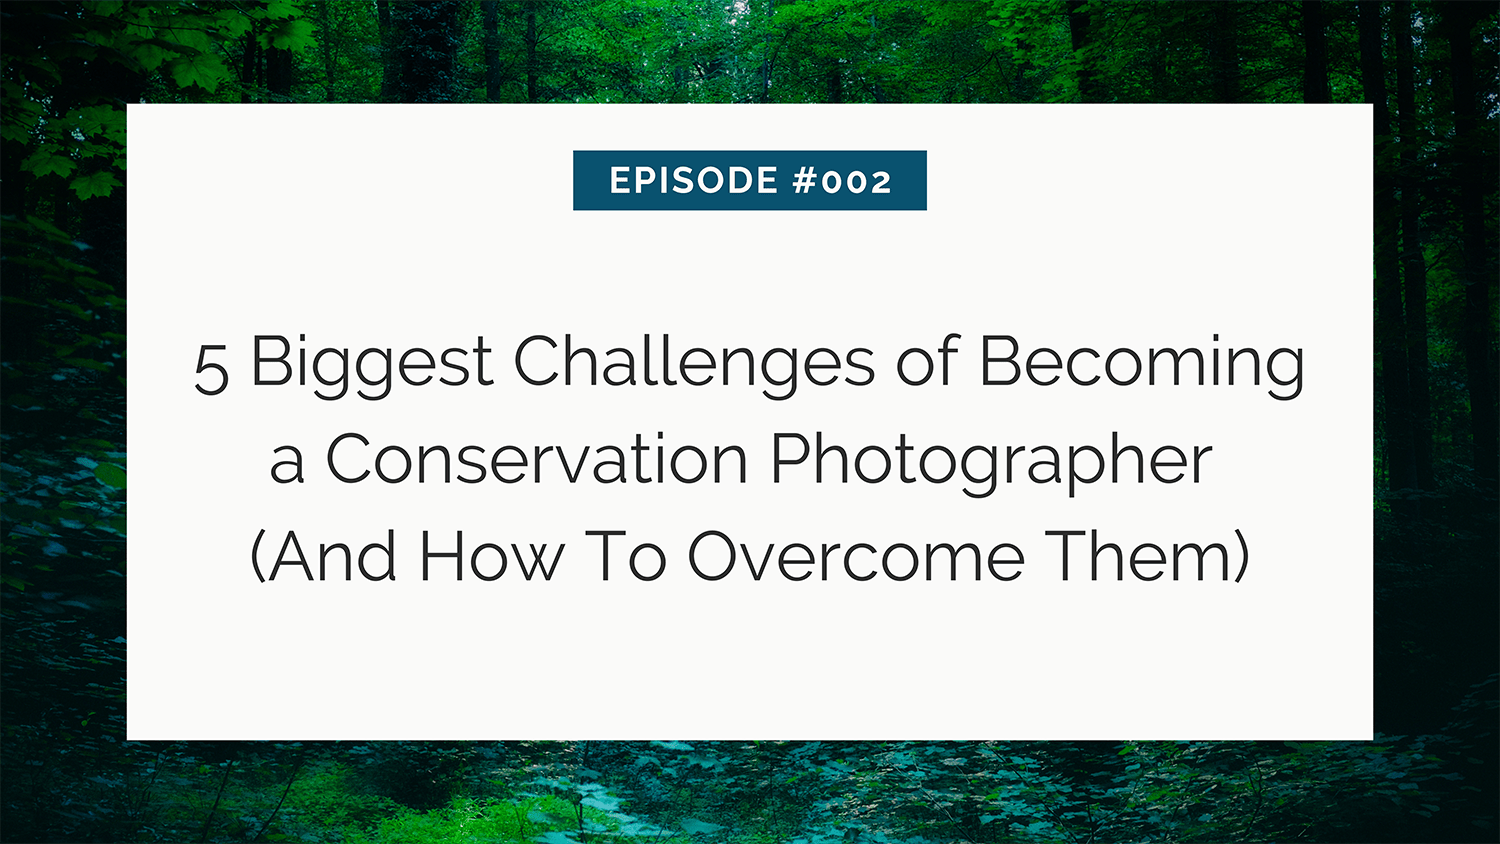 Episode #002 - discussing the top five challenges faced by conservation photographers and offering solutions to overcome them.